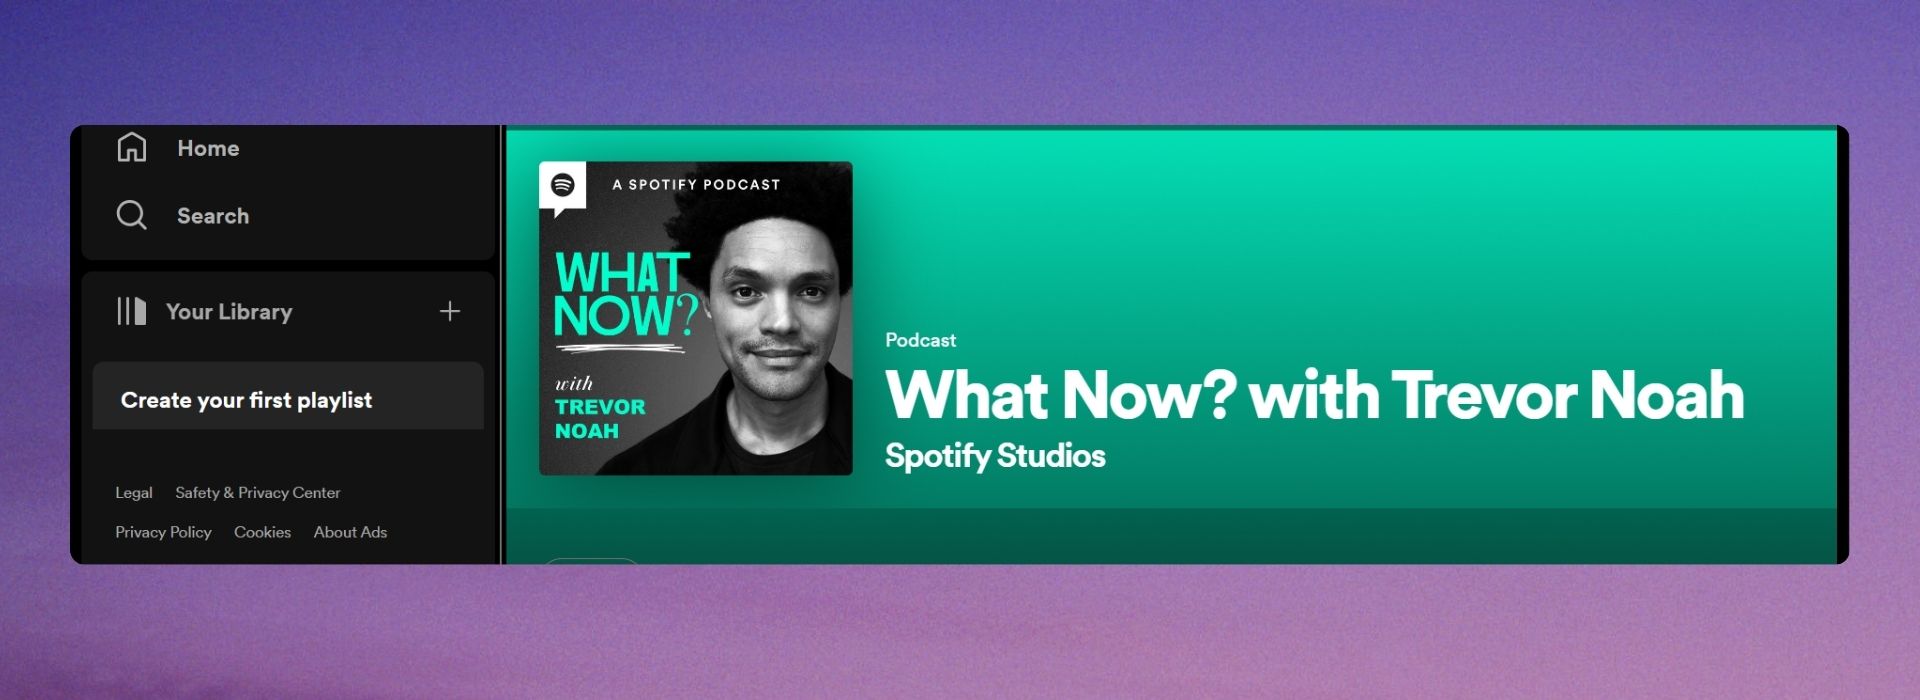 What Now by Trevor Noah